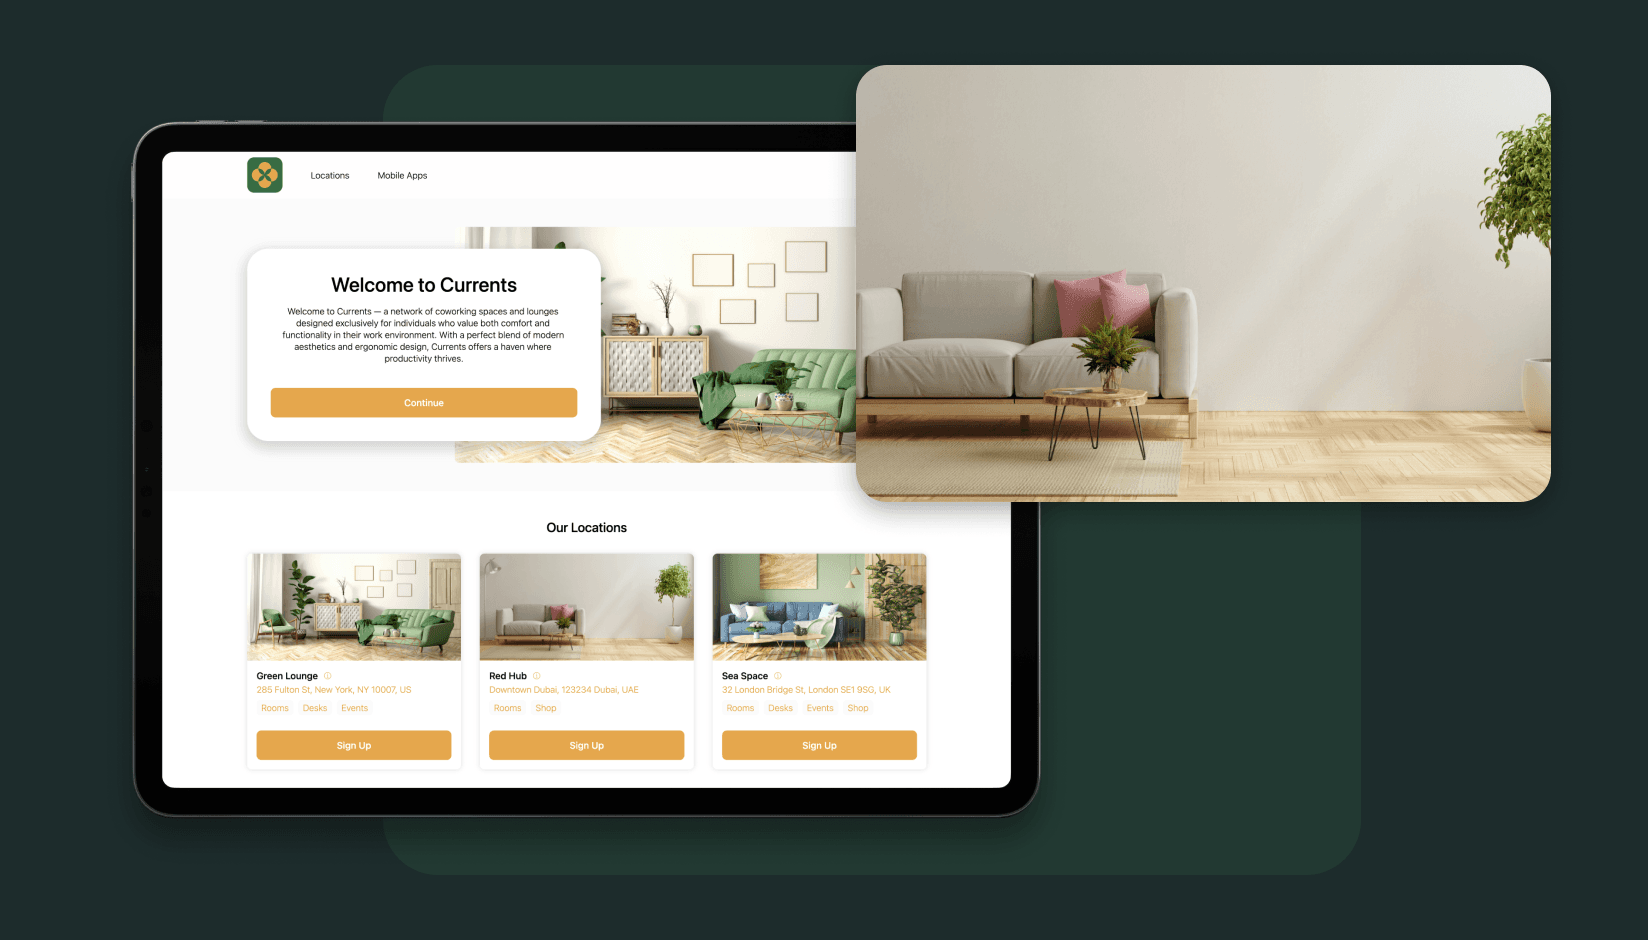 No-code landing page for coworking spaces developed by andcards